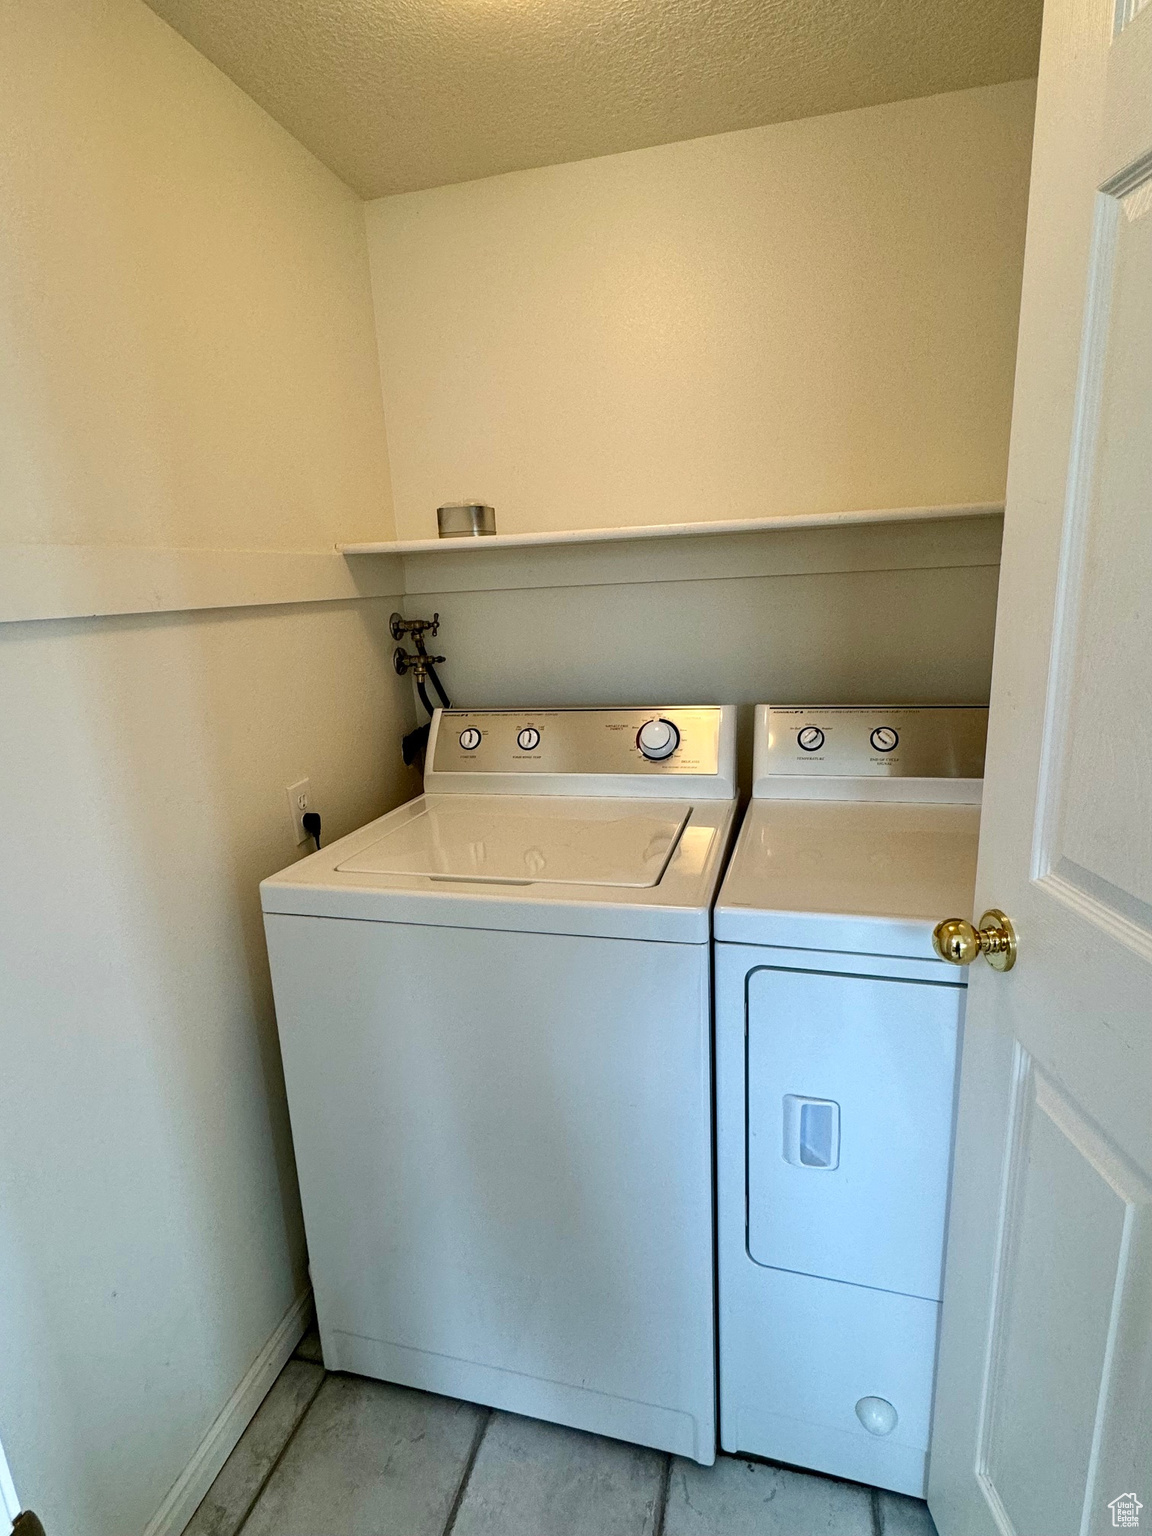 Laundry area featuring a textured ceiling, washing machine and dryer, and light tile floors